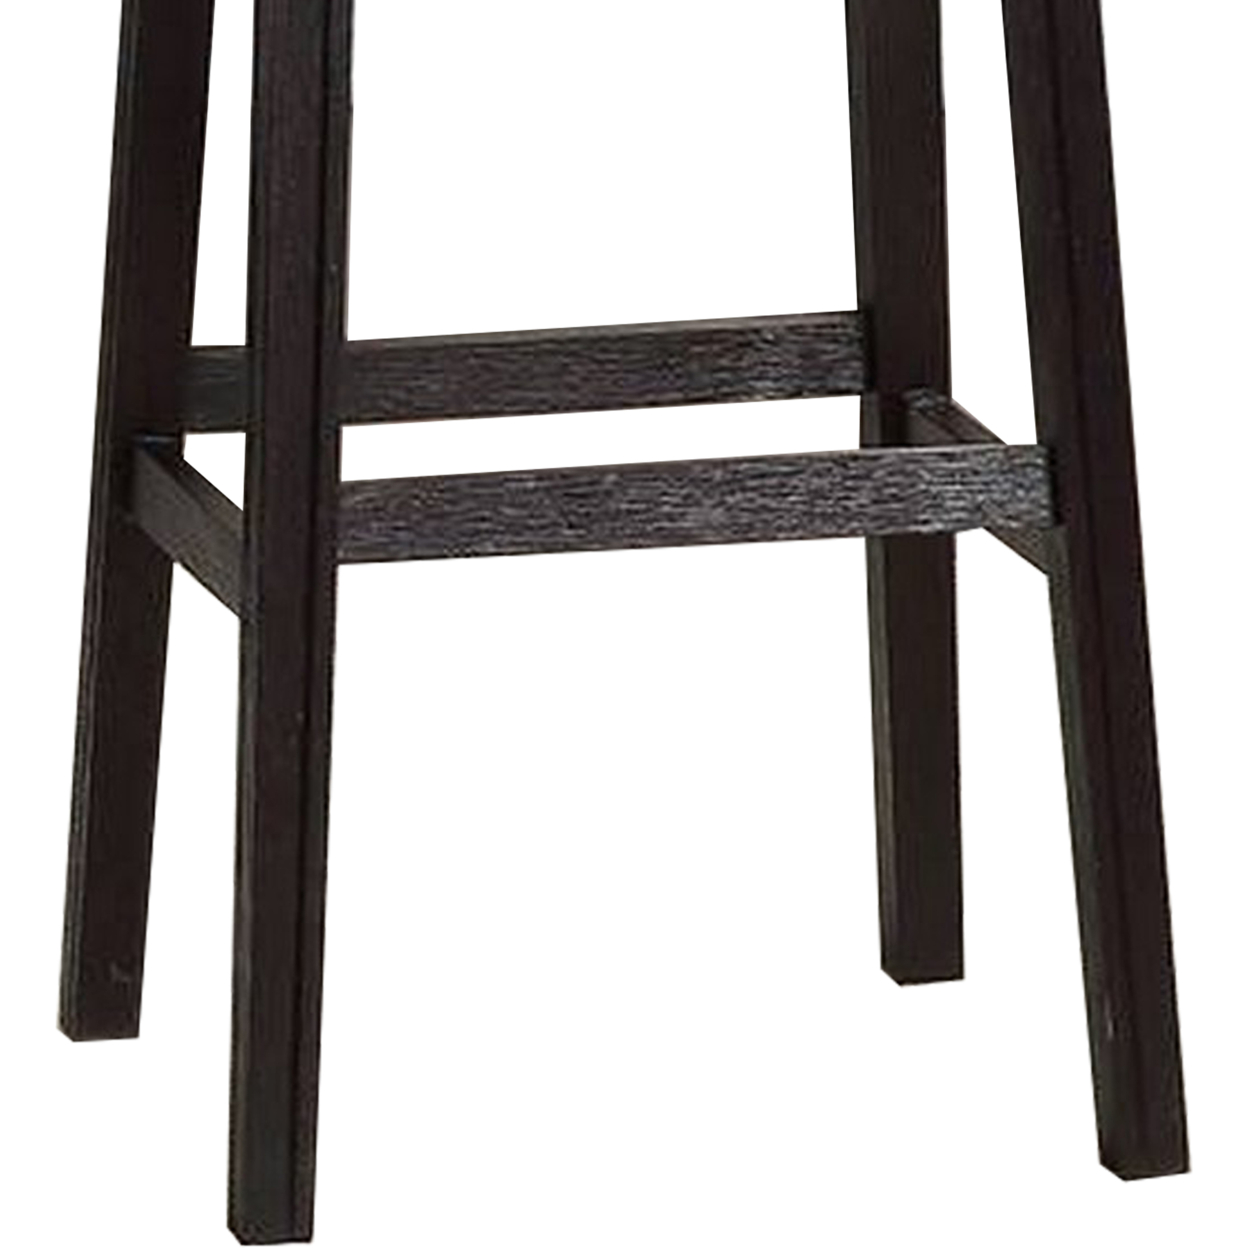 29 Inch Wooden Bar Stool With Upholstered Cushion Seat, Gray And Red- Saltoro Sherpi